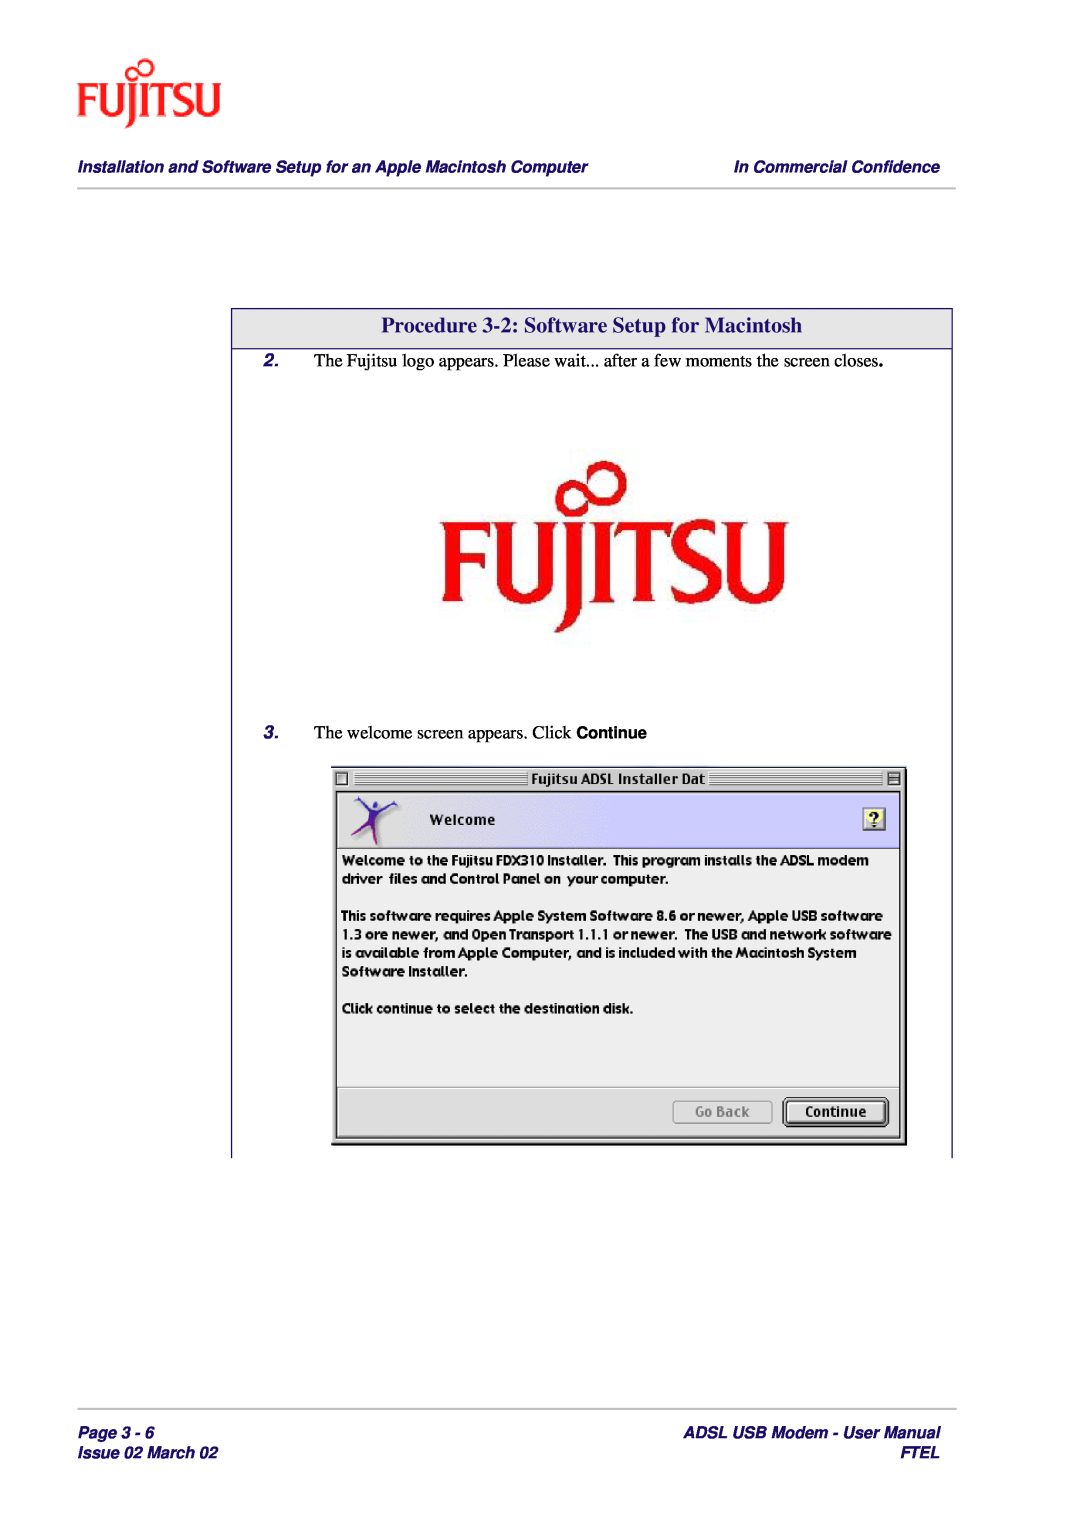 Fujitsu 3XAX-00803AAS Procedure 3-2 Software Setup for Macintosh, In Commercial Confidence, Page 3, Issue 02 March, Ftel 